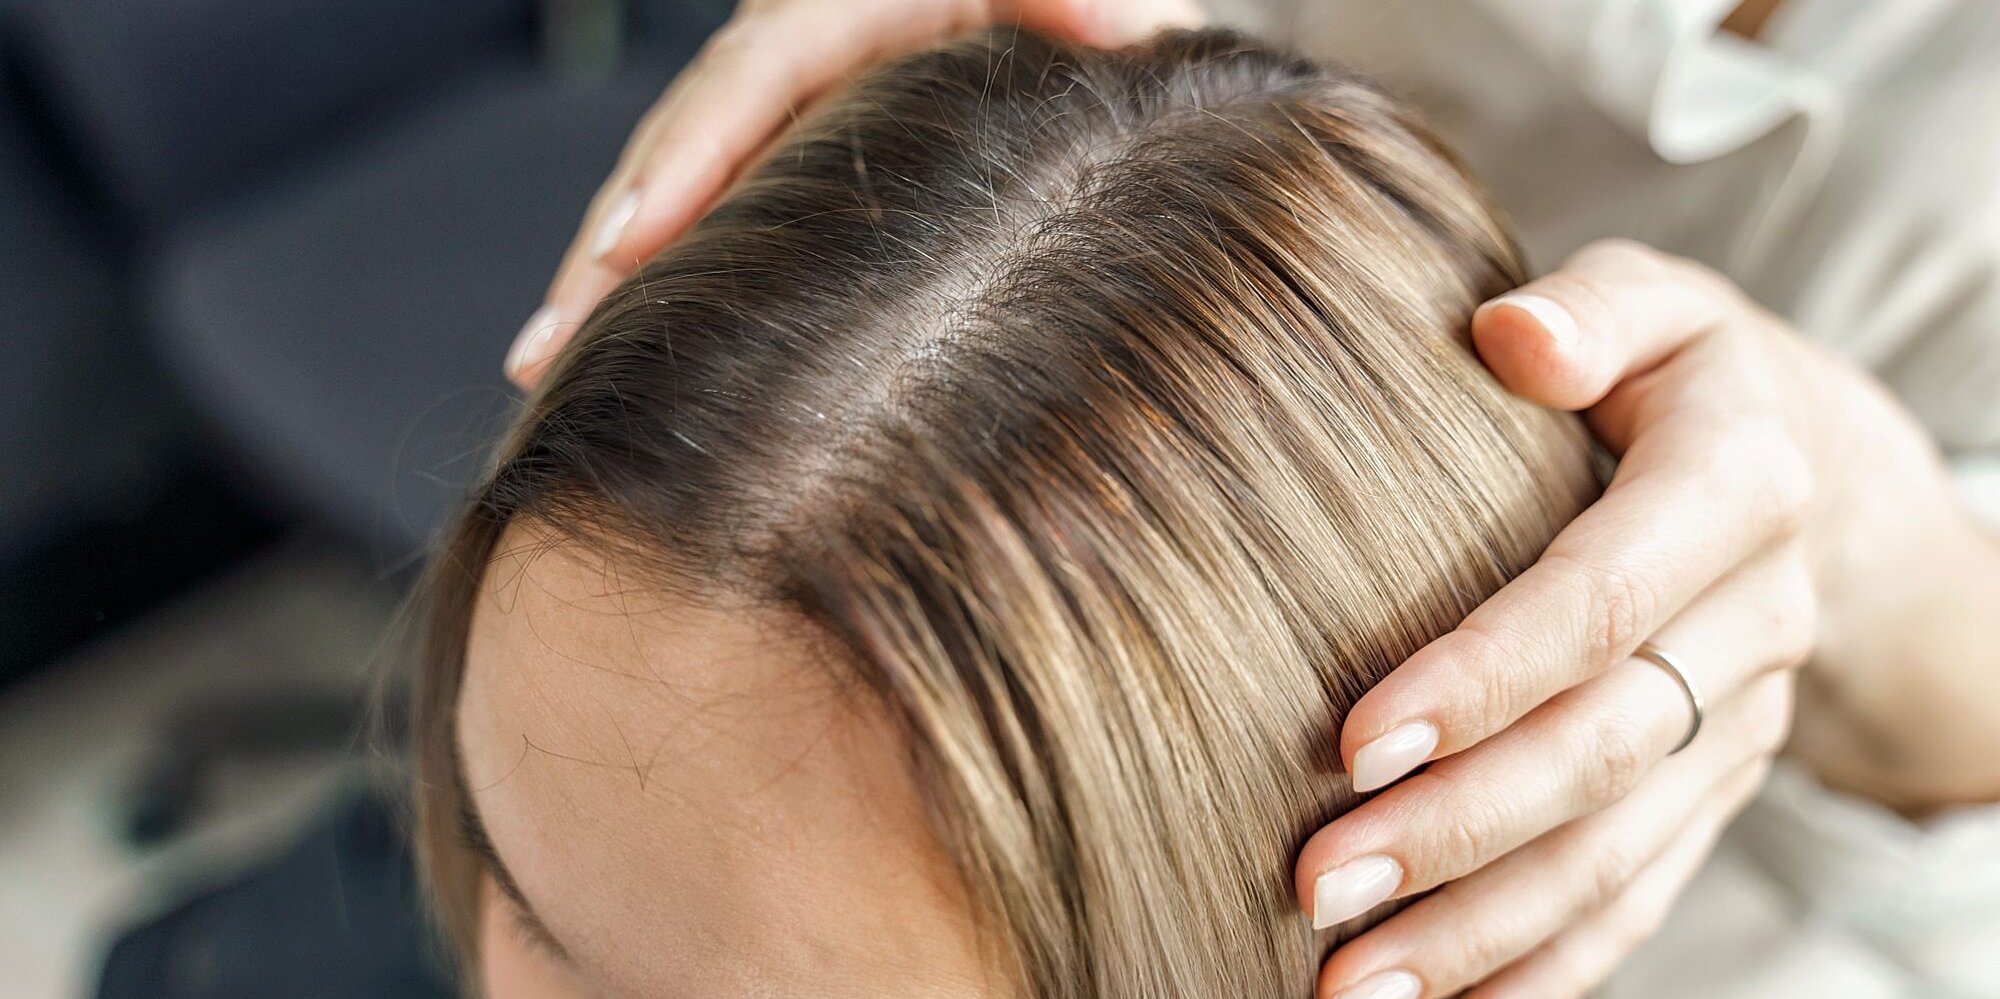 Is Your Hair's Part Line Getting Wider? Here's What May Be Happening—and What to Do About It